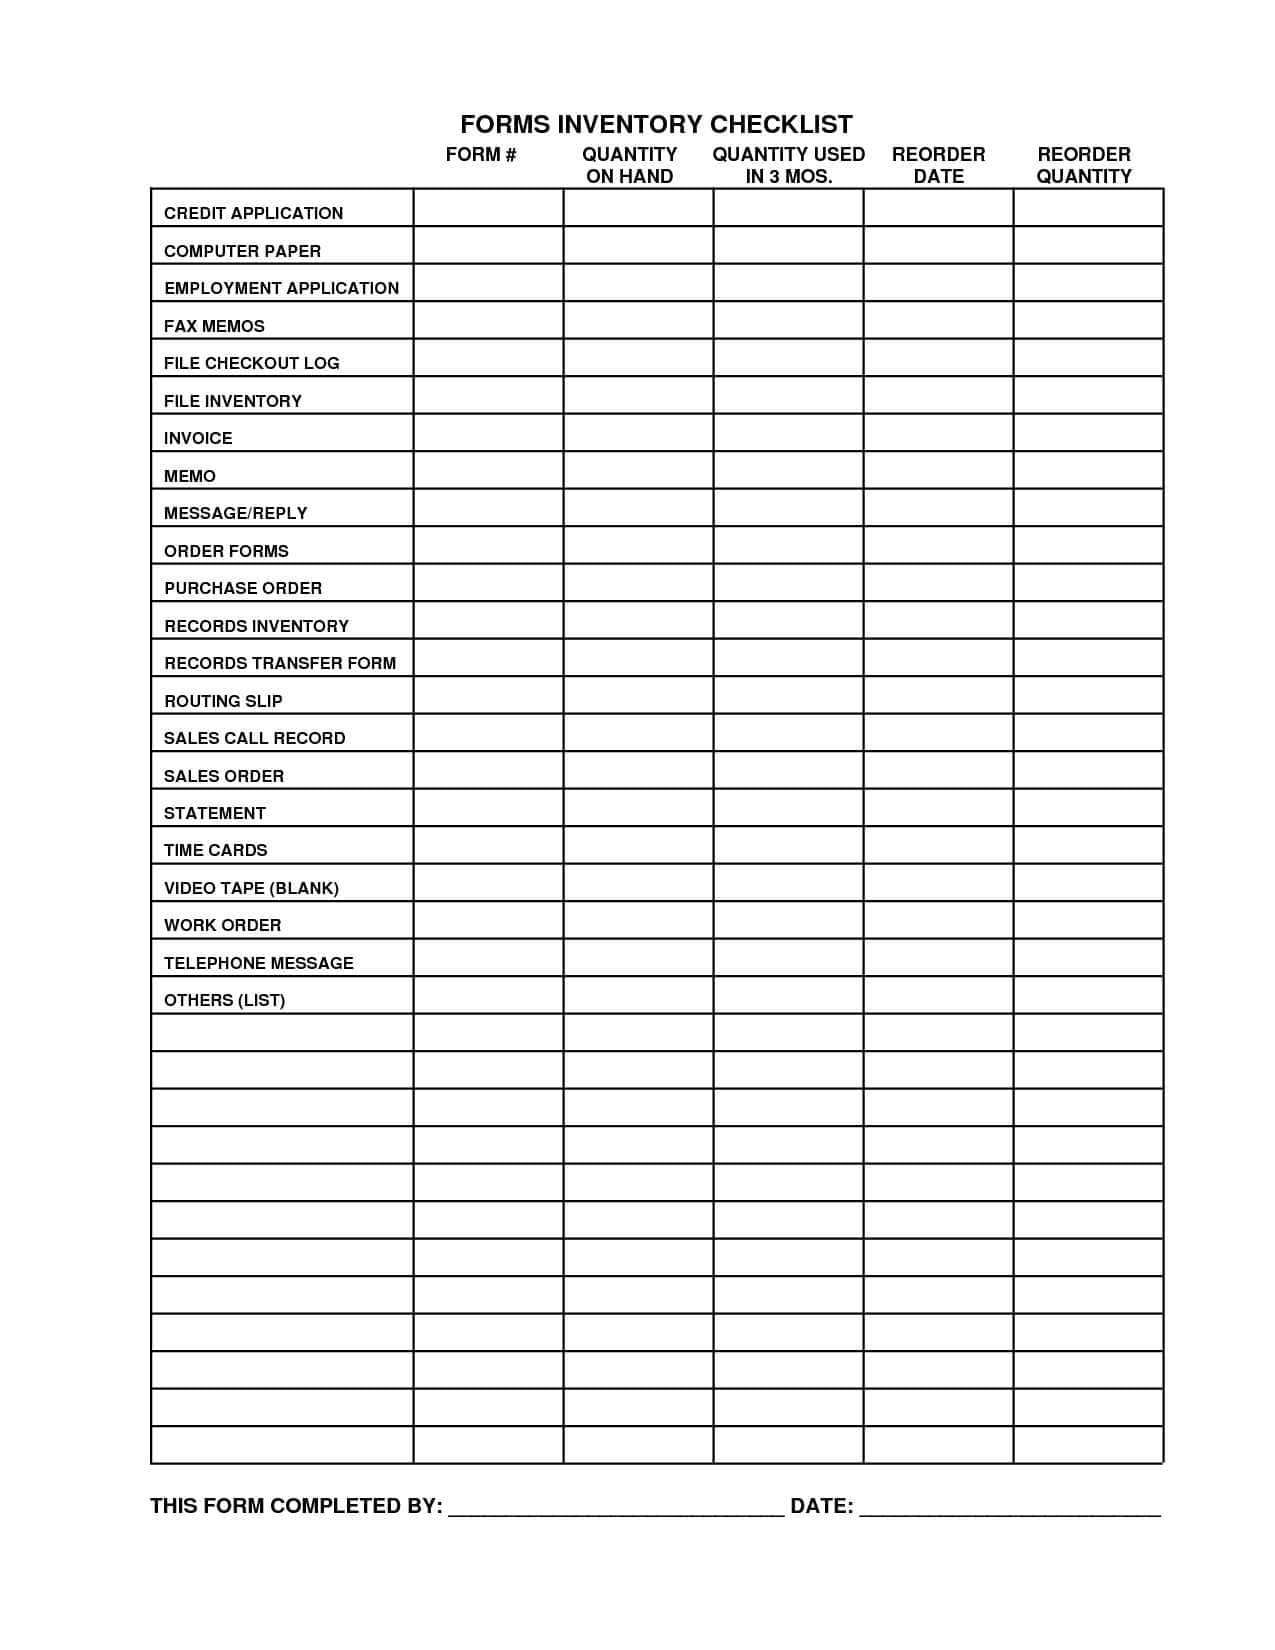 Contents Insurance Checklist Spreadsheet inside Home Inventory Template With Pictures And Contents Insurance